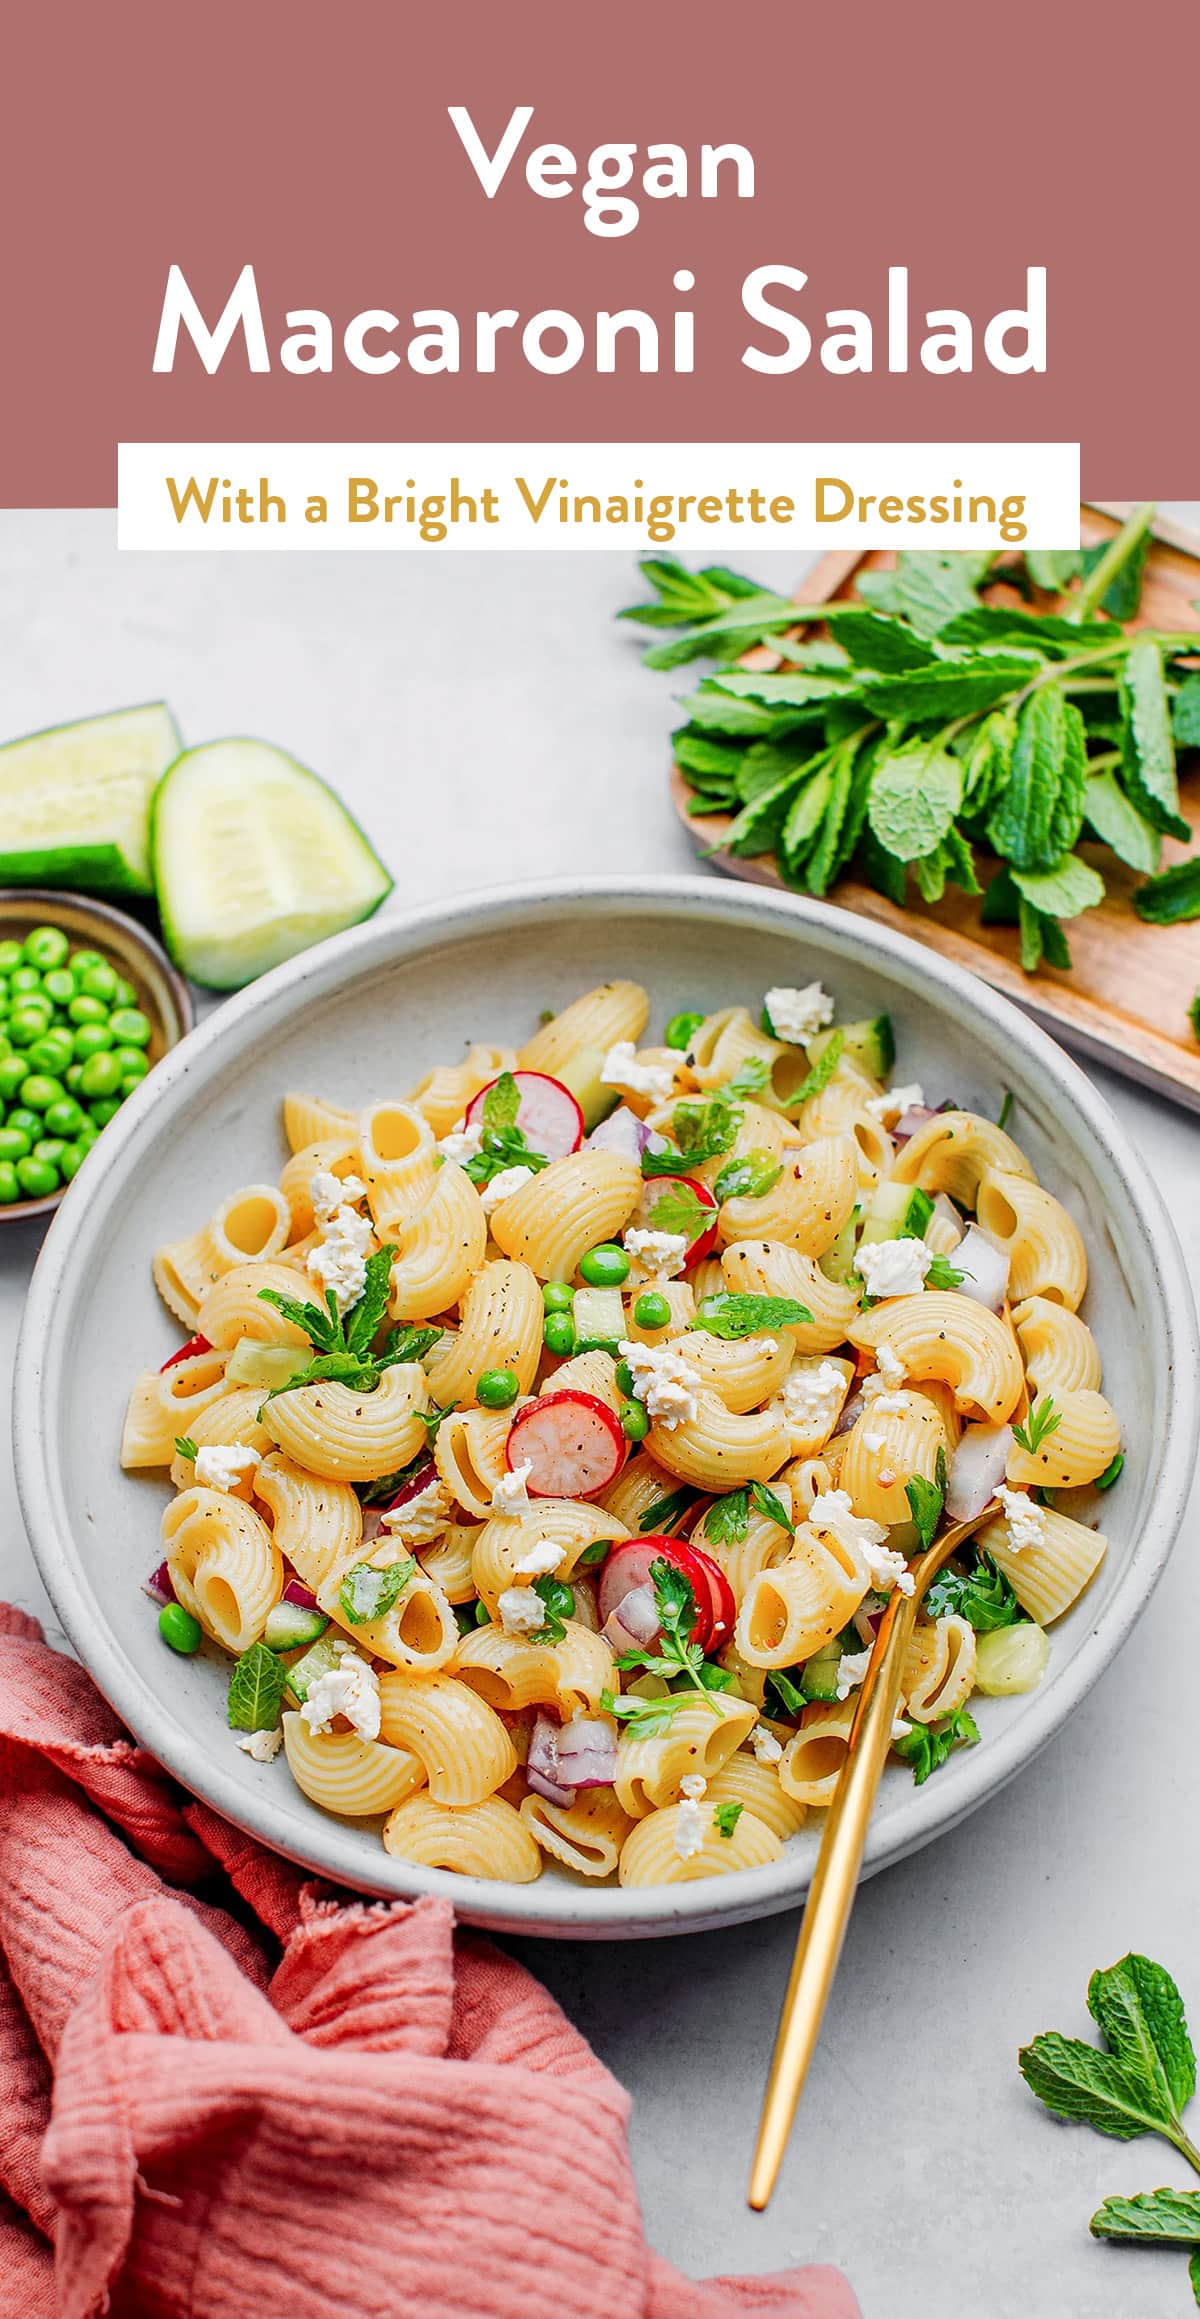 This fresh macaroni salad is packed with crispy veggies, fresh herbs, al dente pasta, and comes with a bright vinaigrette dressing! Plant-based, refreshing, and super simple to prepare! #pasta #salad #vegan #plantbased